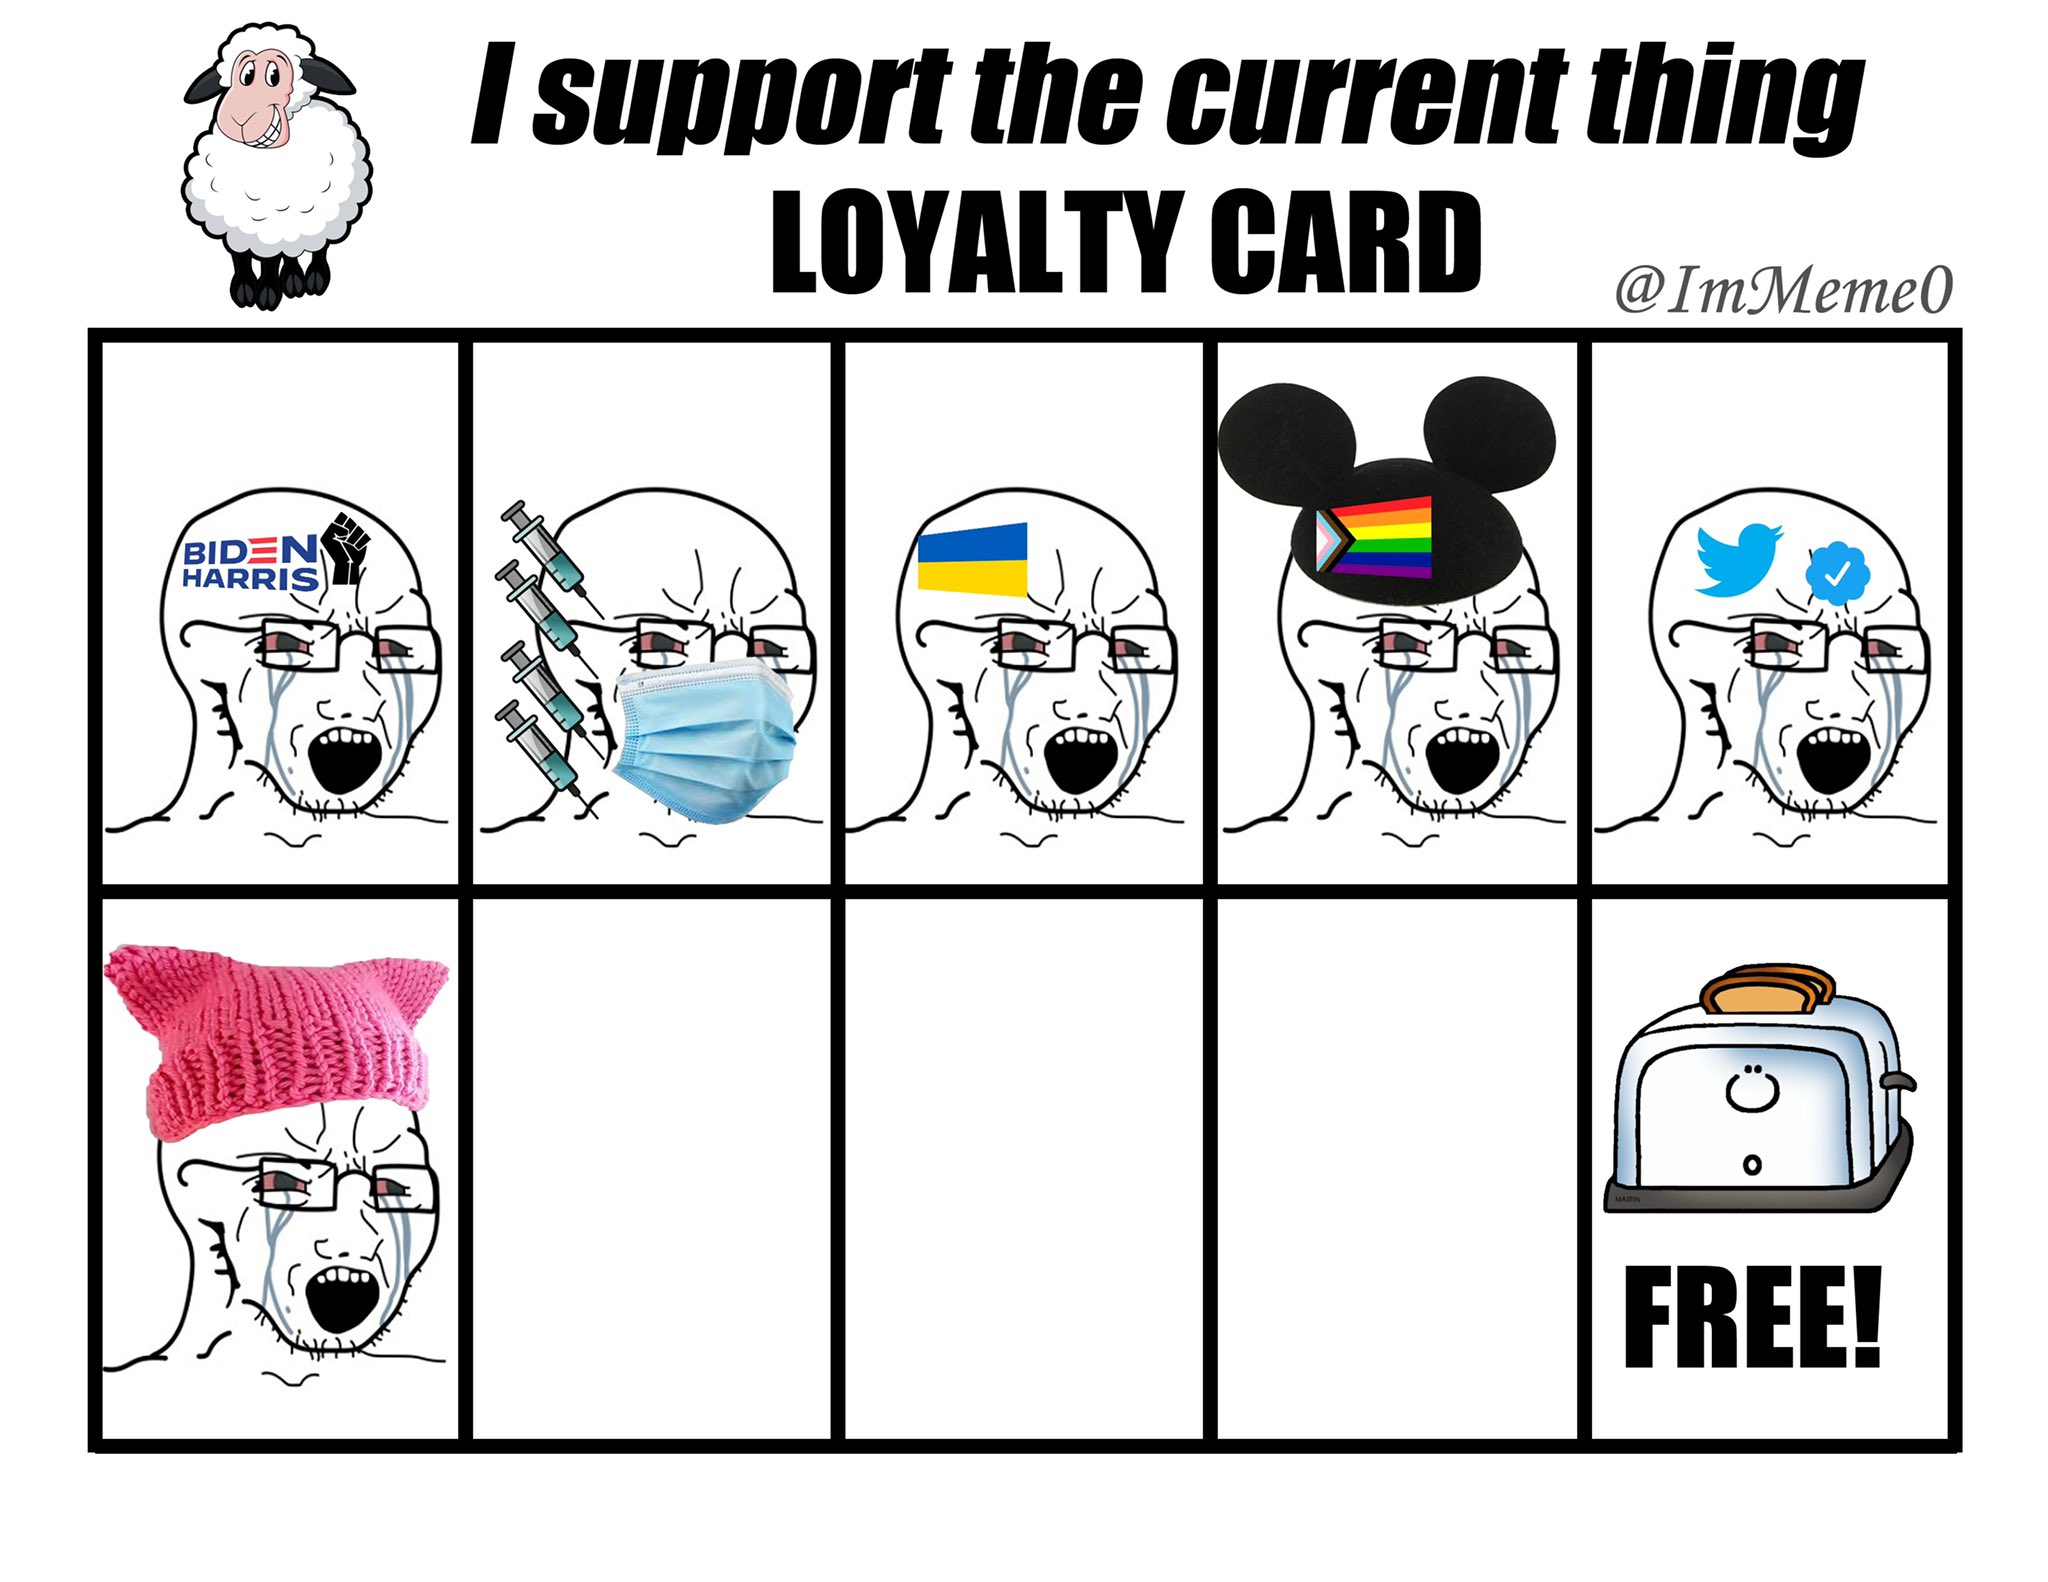 Send this “I support the current thing” loyalty card to your lib ...